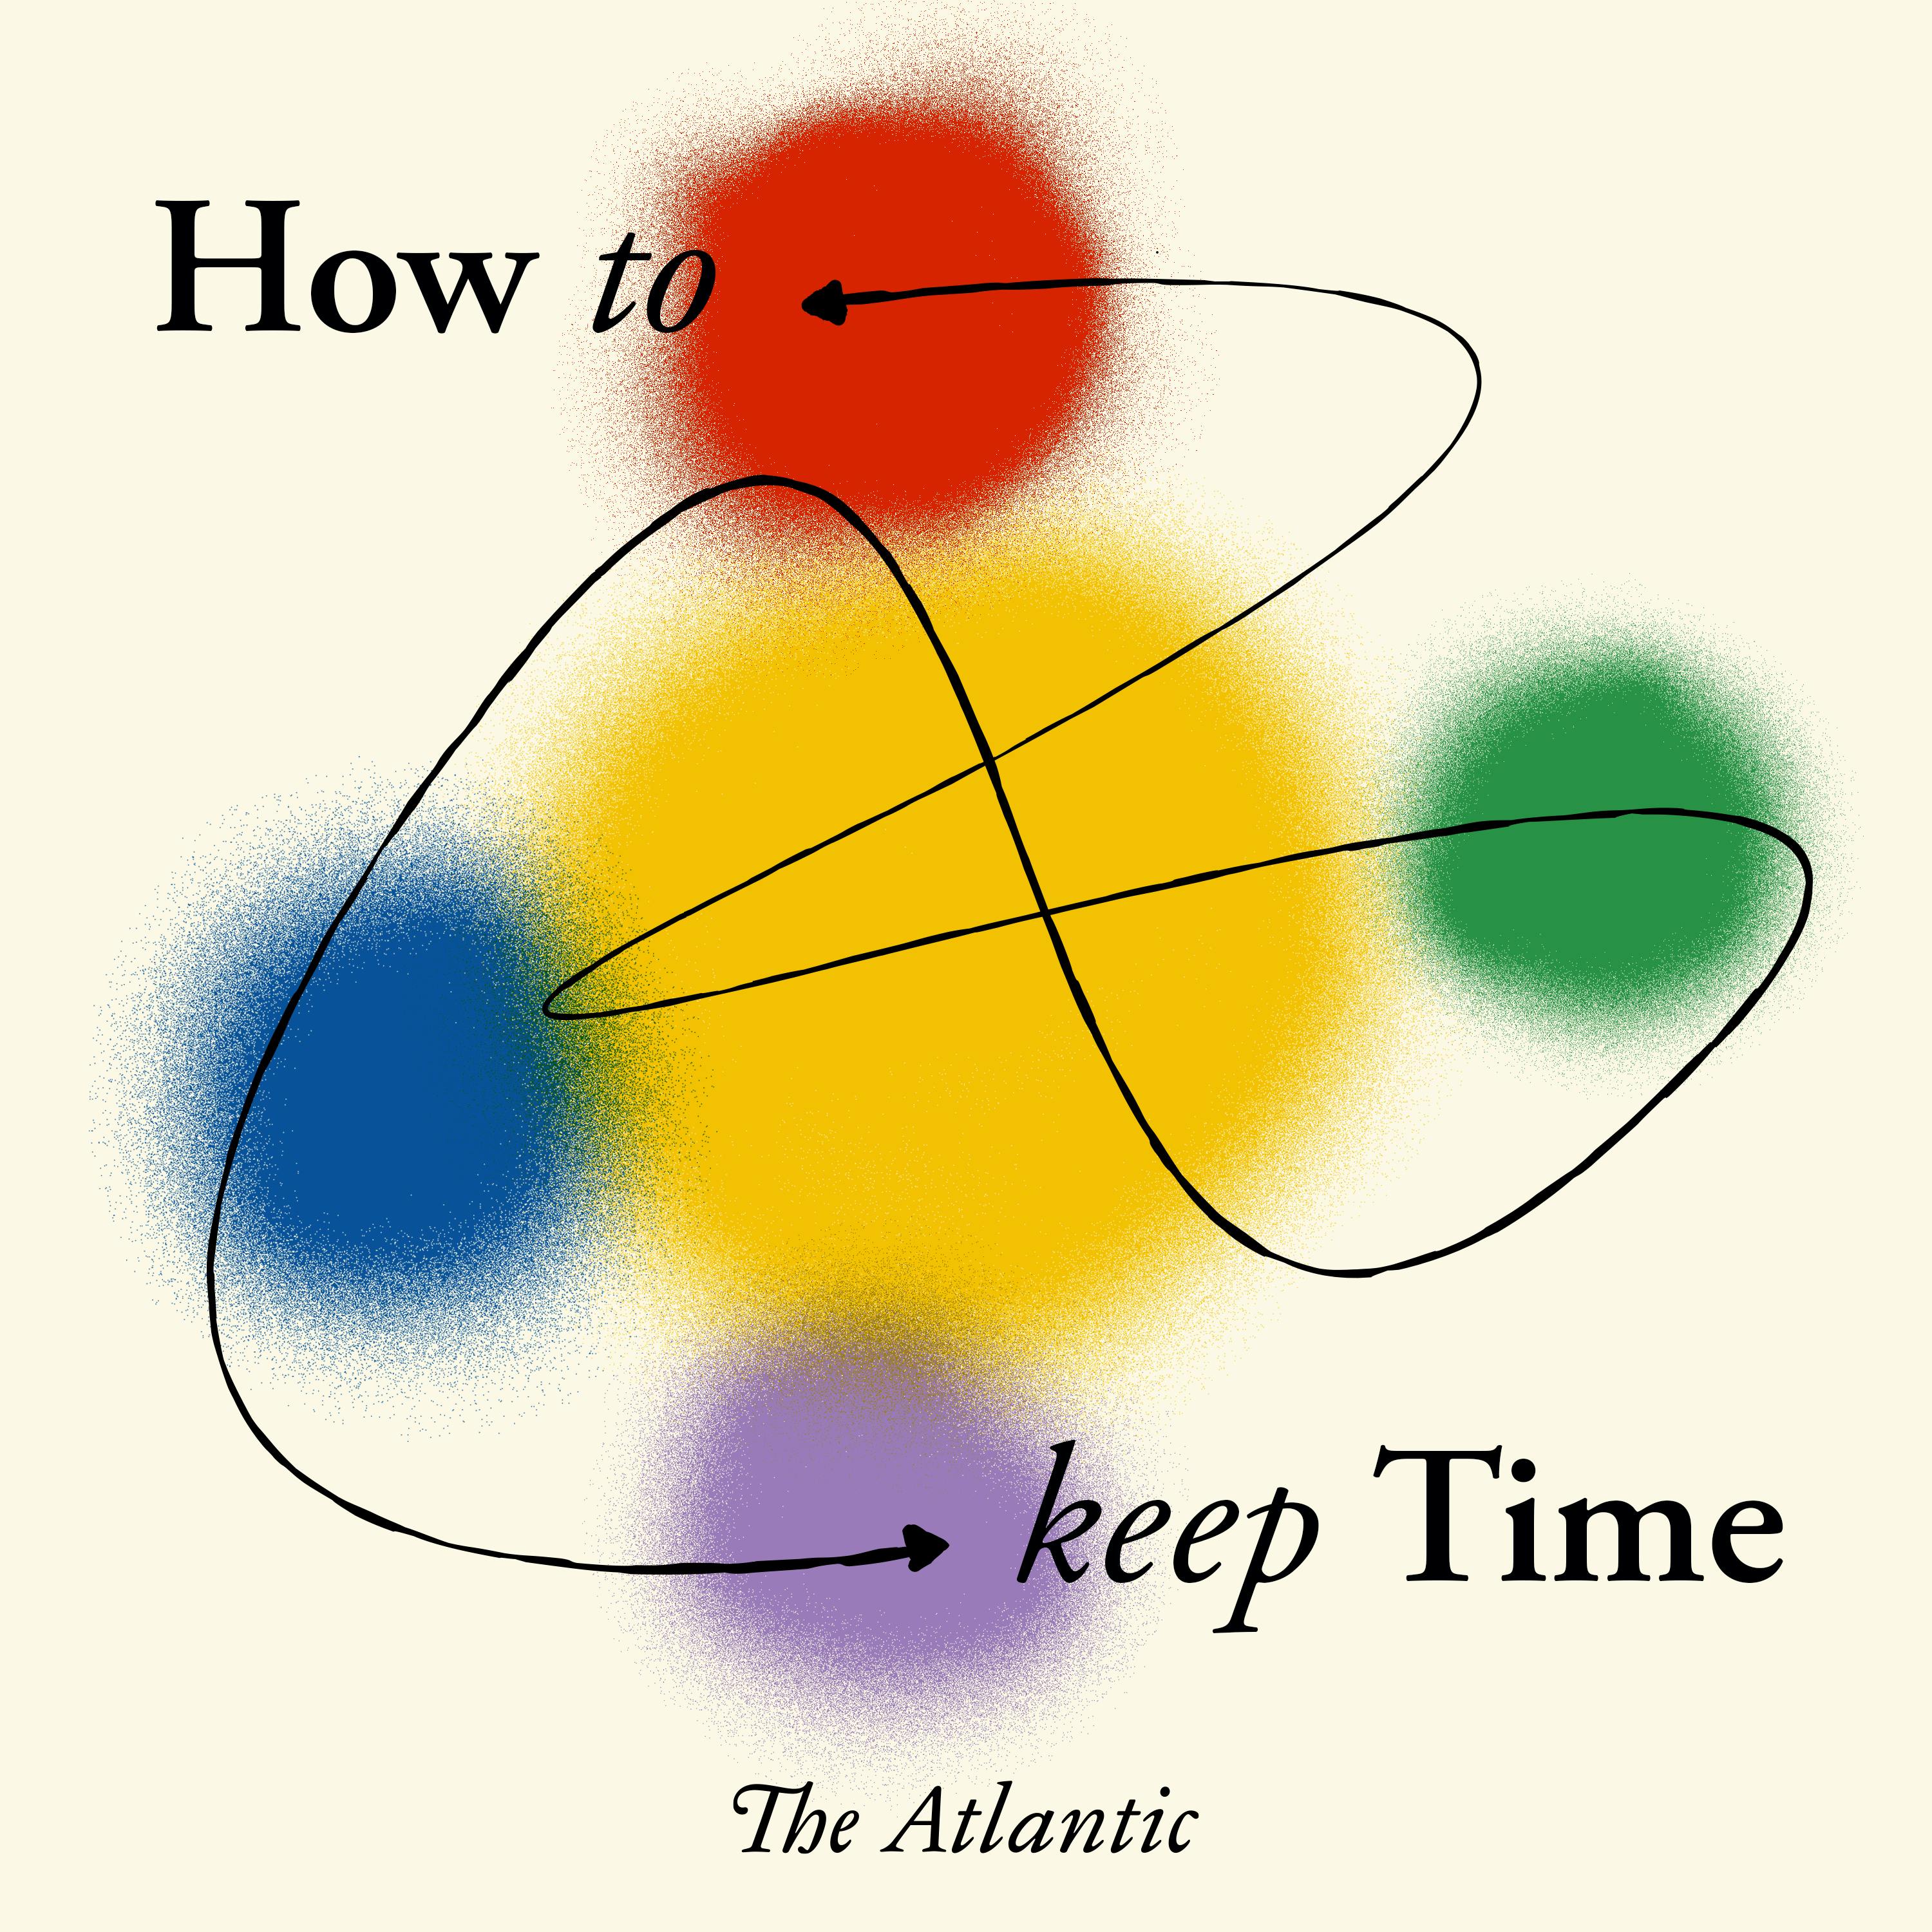 How to Waste Time